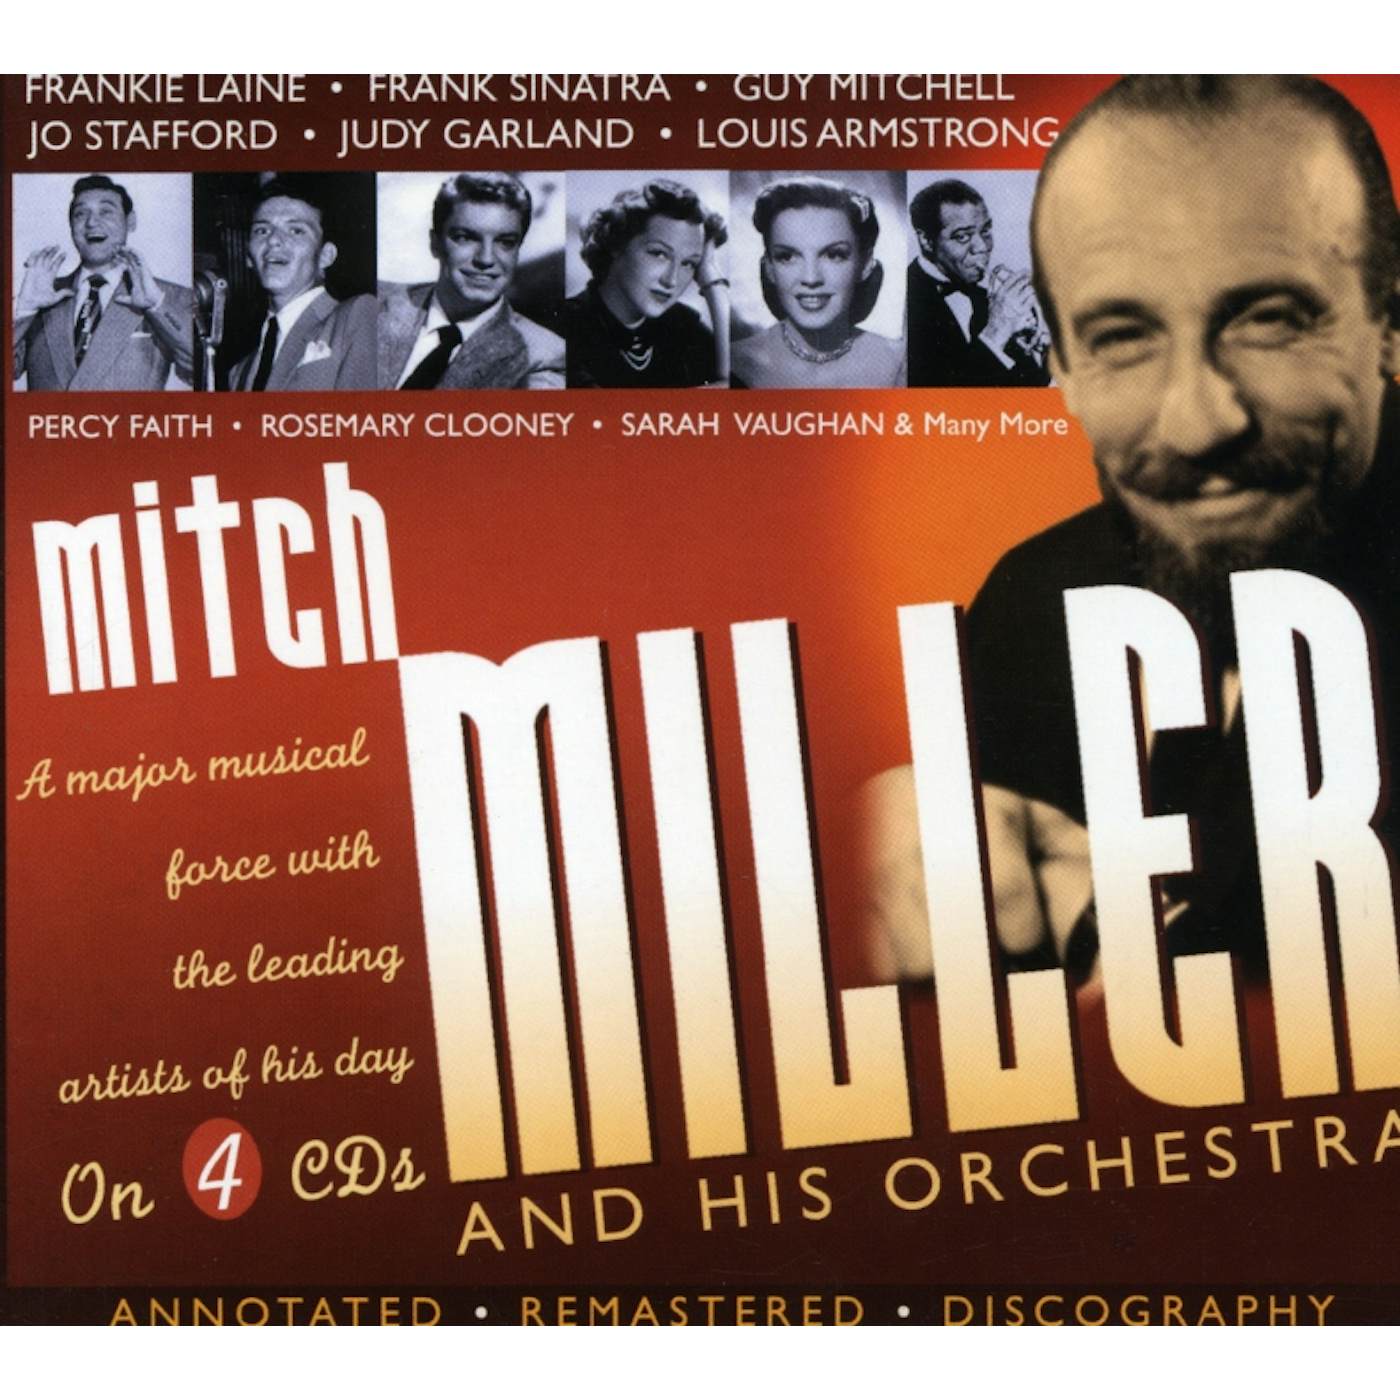 Mitch Miller MAJOR MUSICAL FORCE WITH THE LEADING ARTISTS OF CD